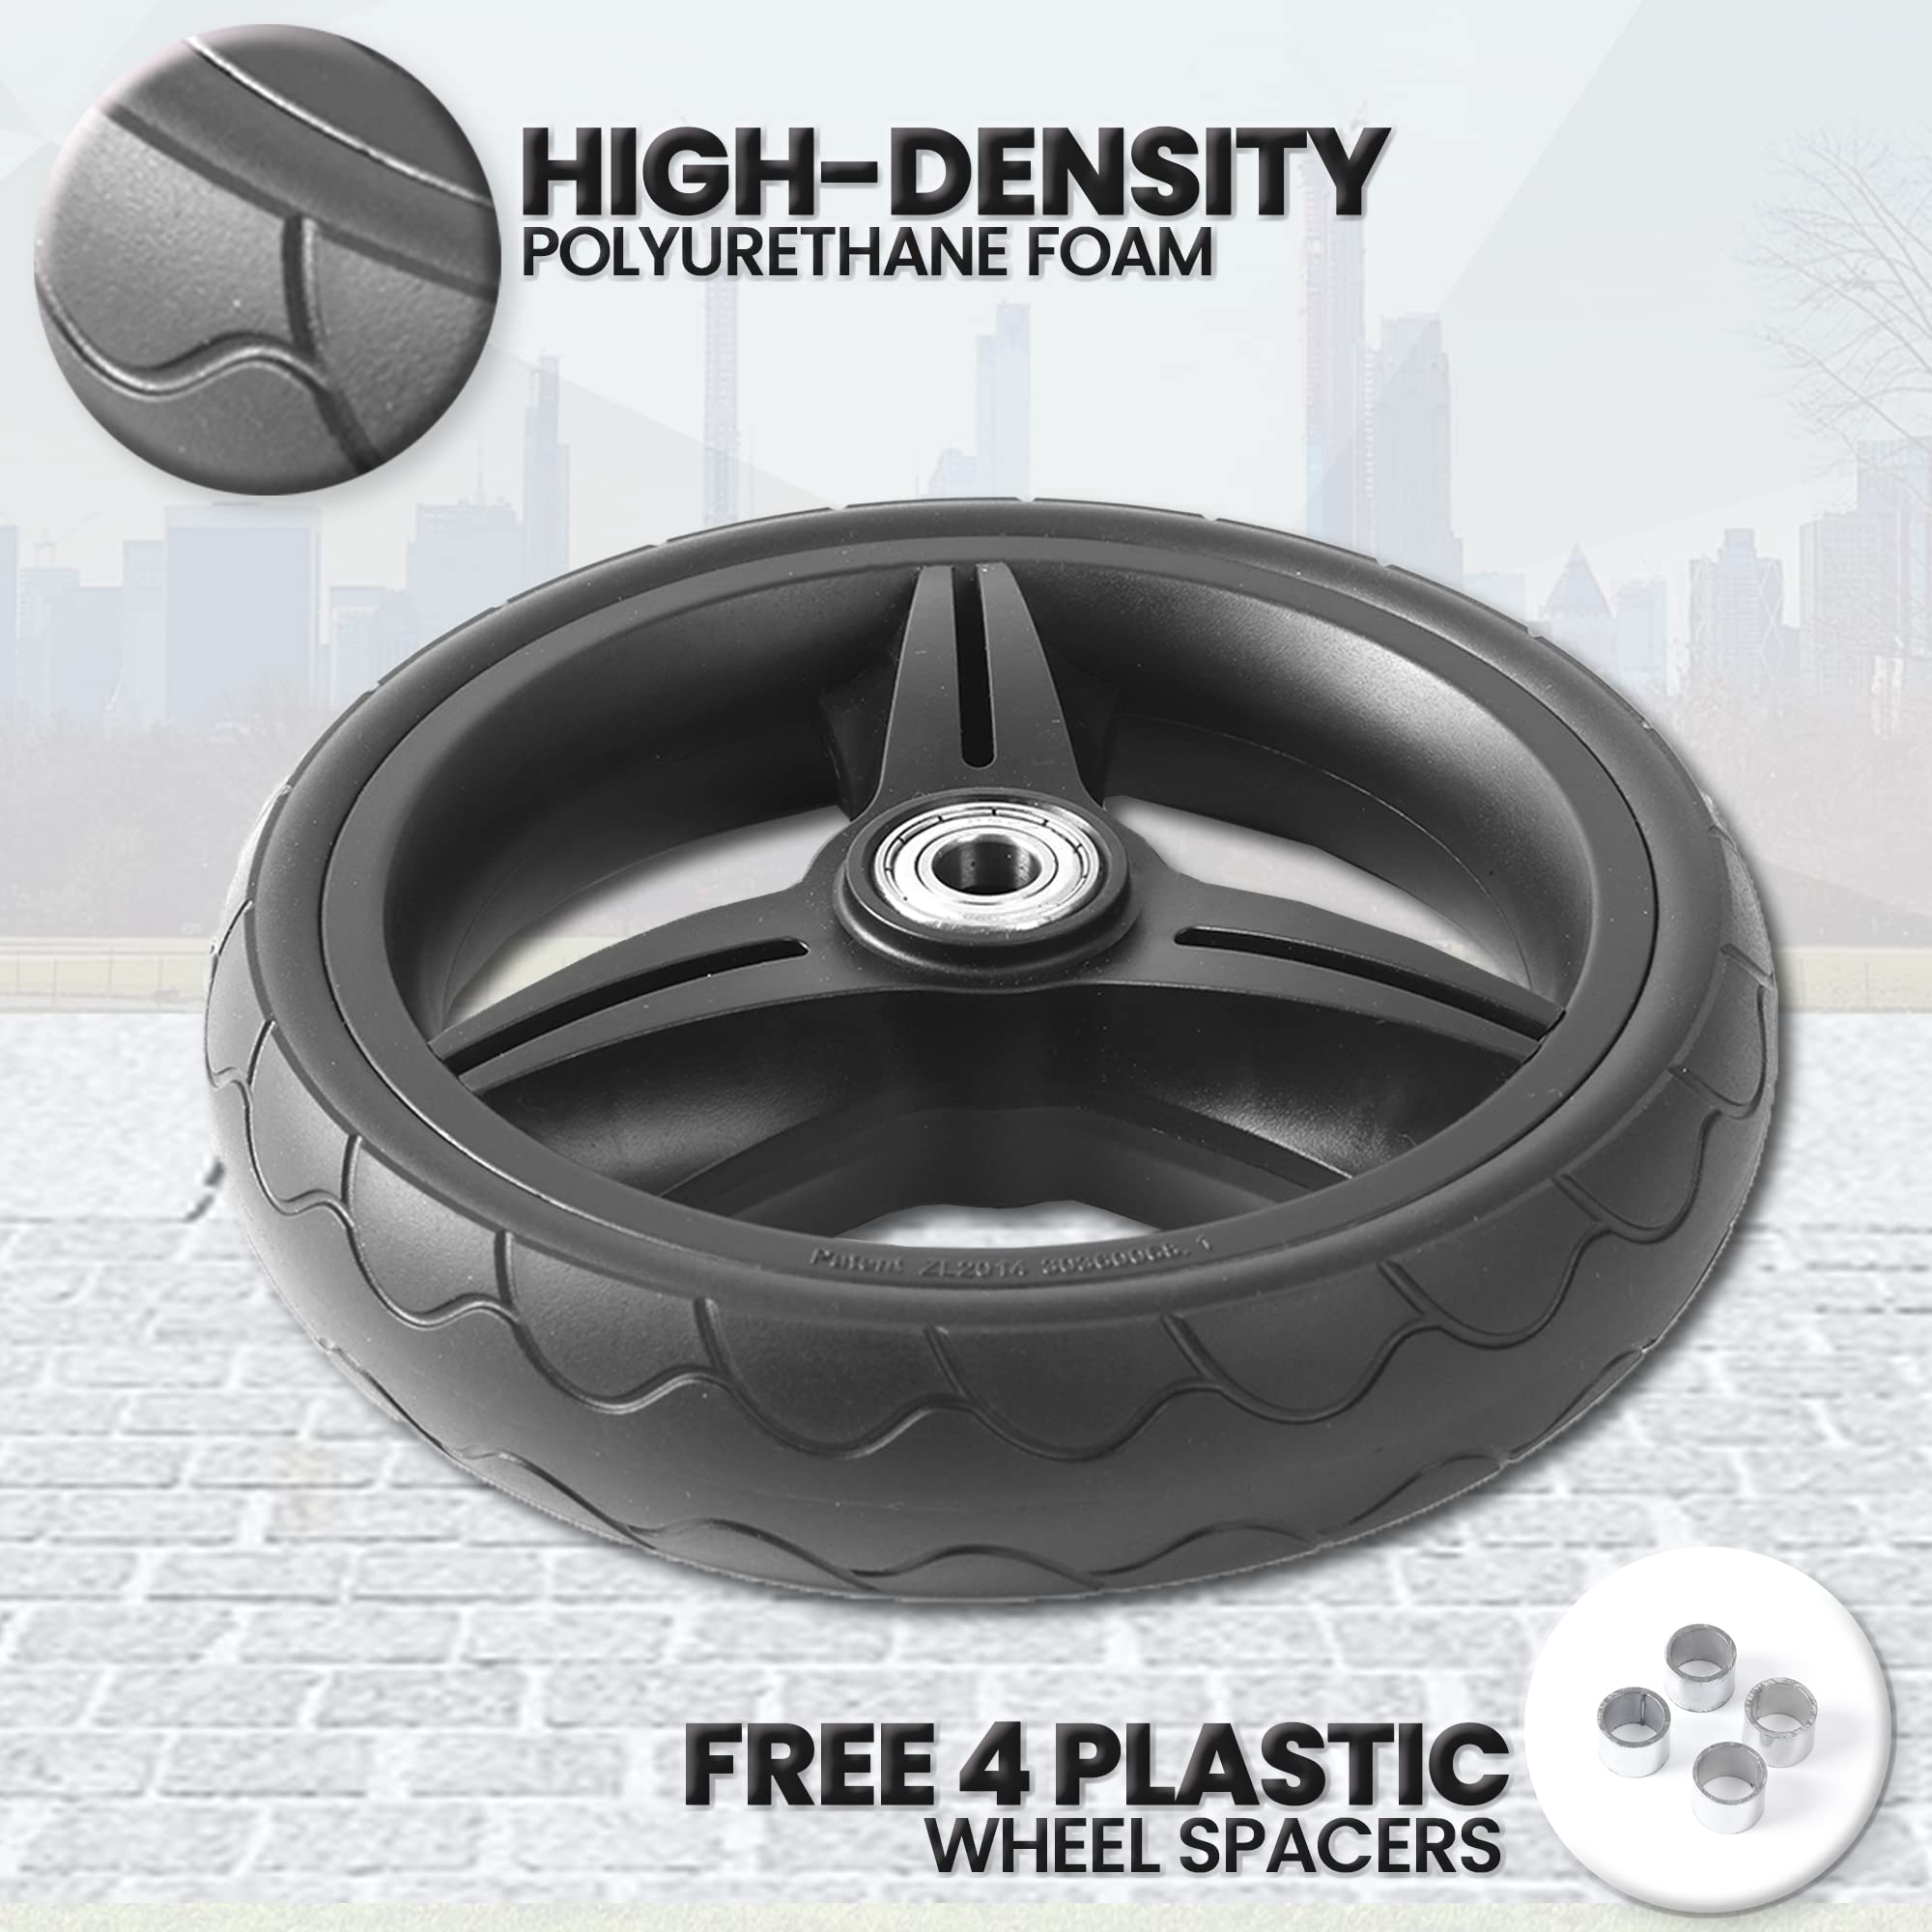 CalPalmy Front Wheels and Tires for Baby Strollers - 1.6” Hub Length and 0.488” Borehole - Fits Baby Jogger City Select and City Premier Stroller Models